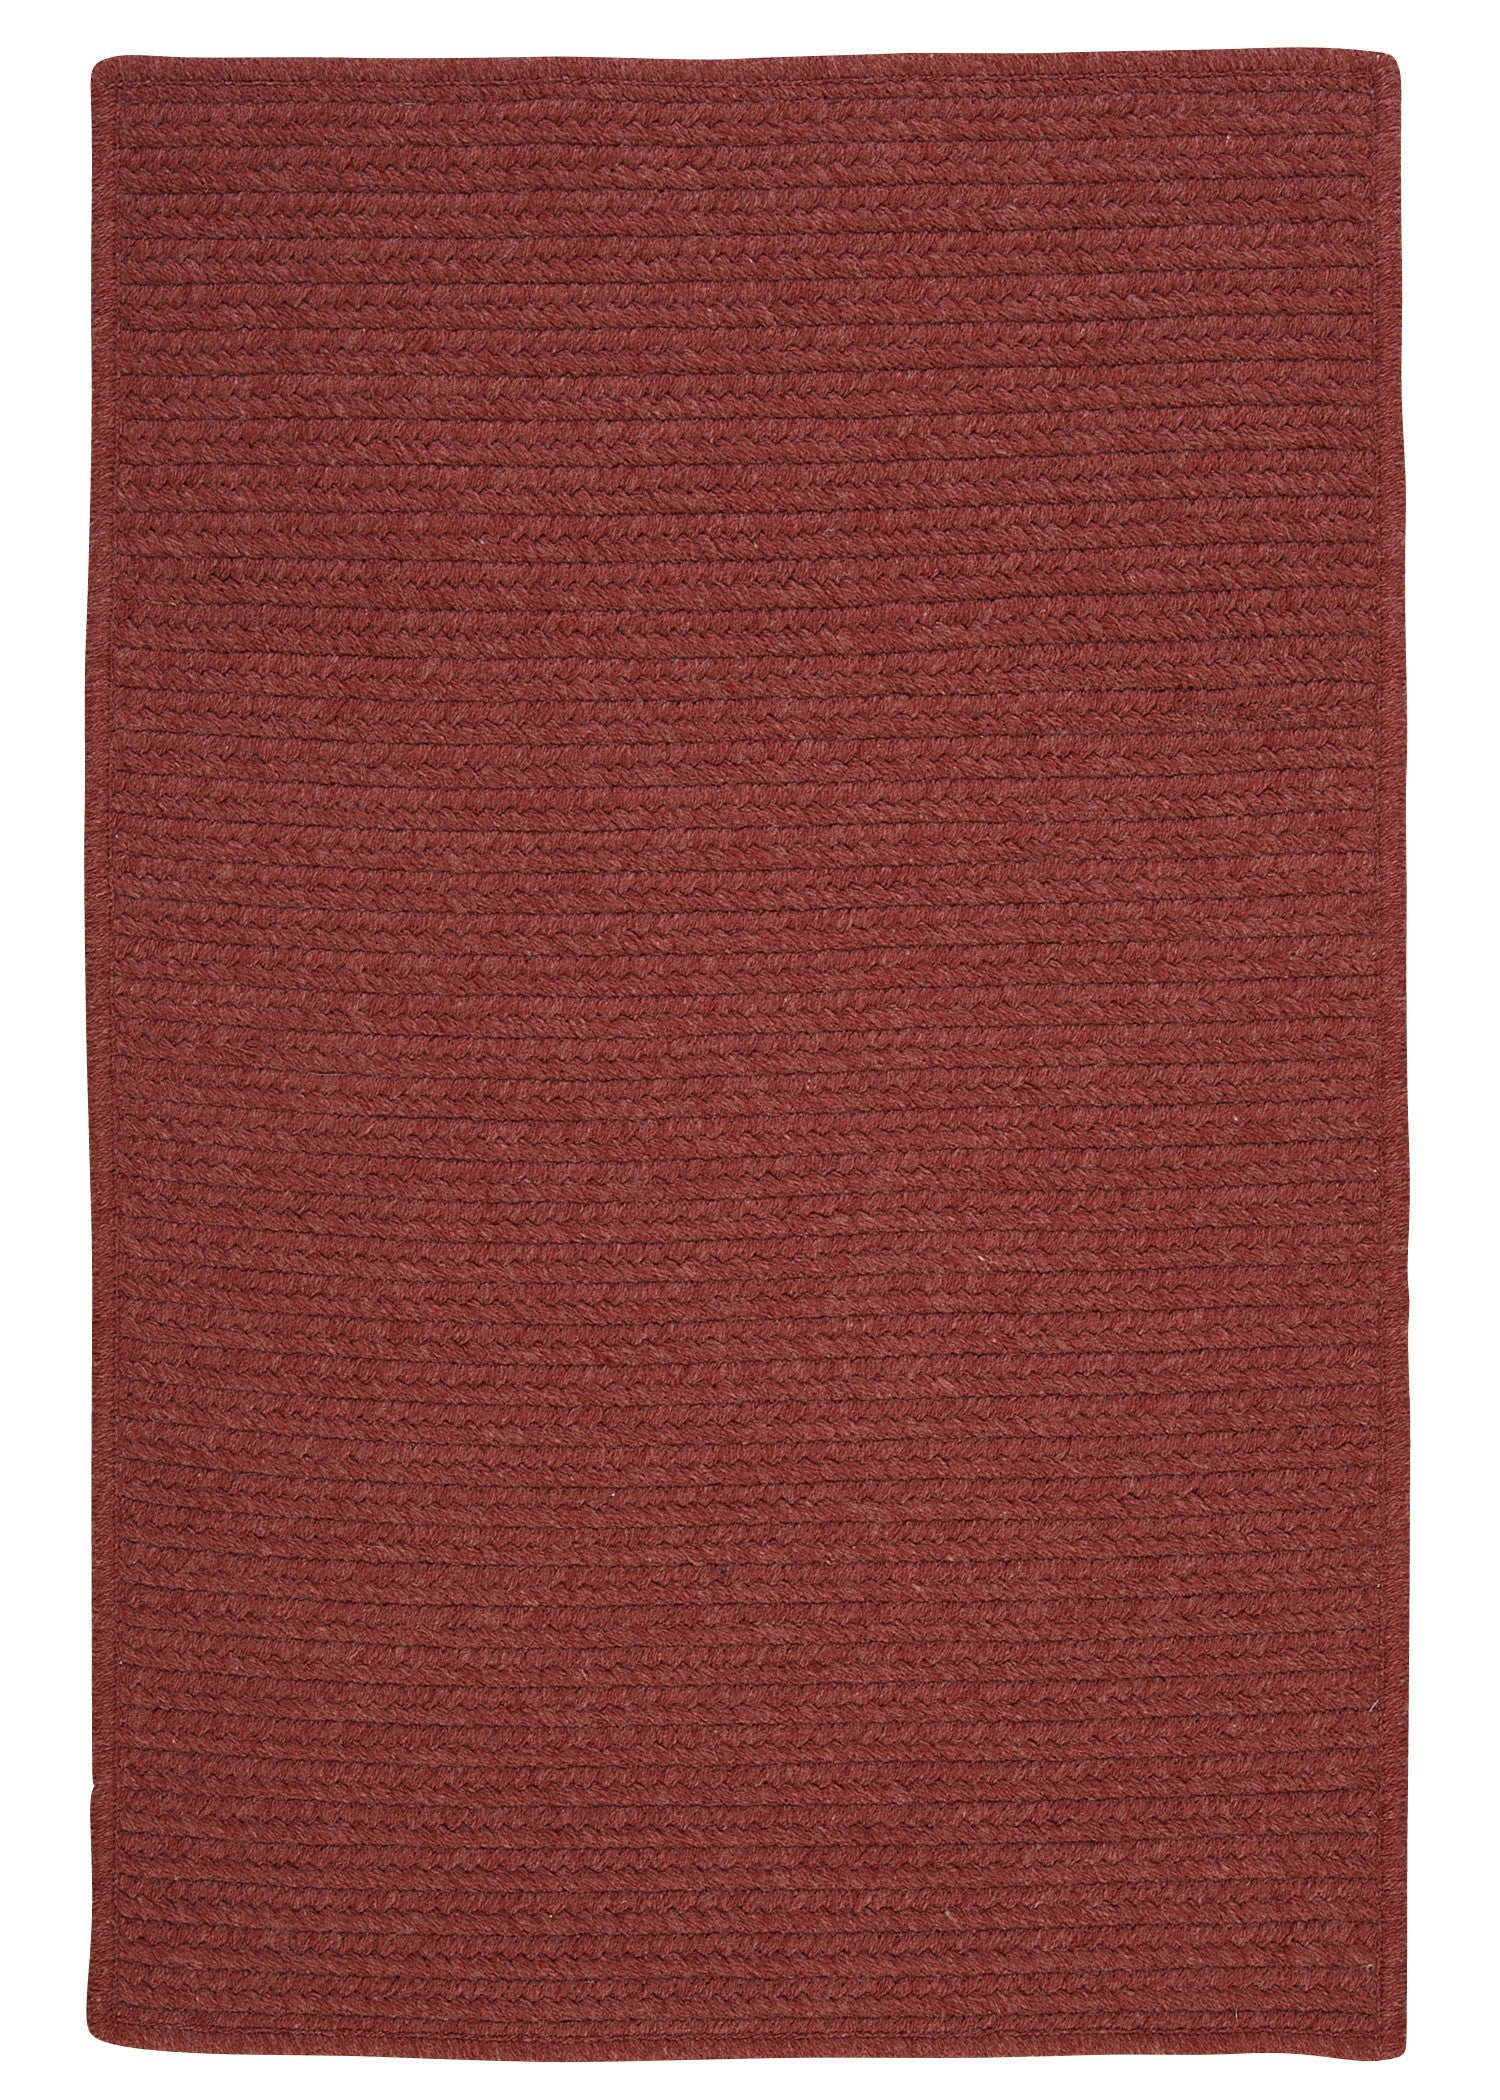 Colonial Mills Westminster WM70 Rosewood Traditional Area Rug